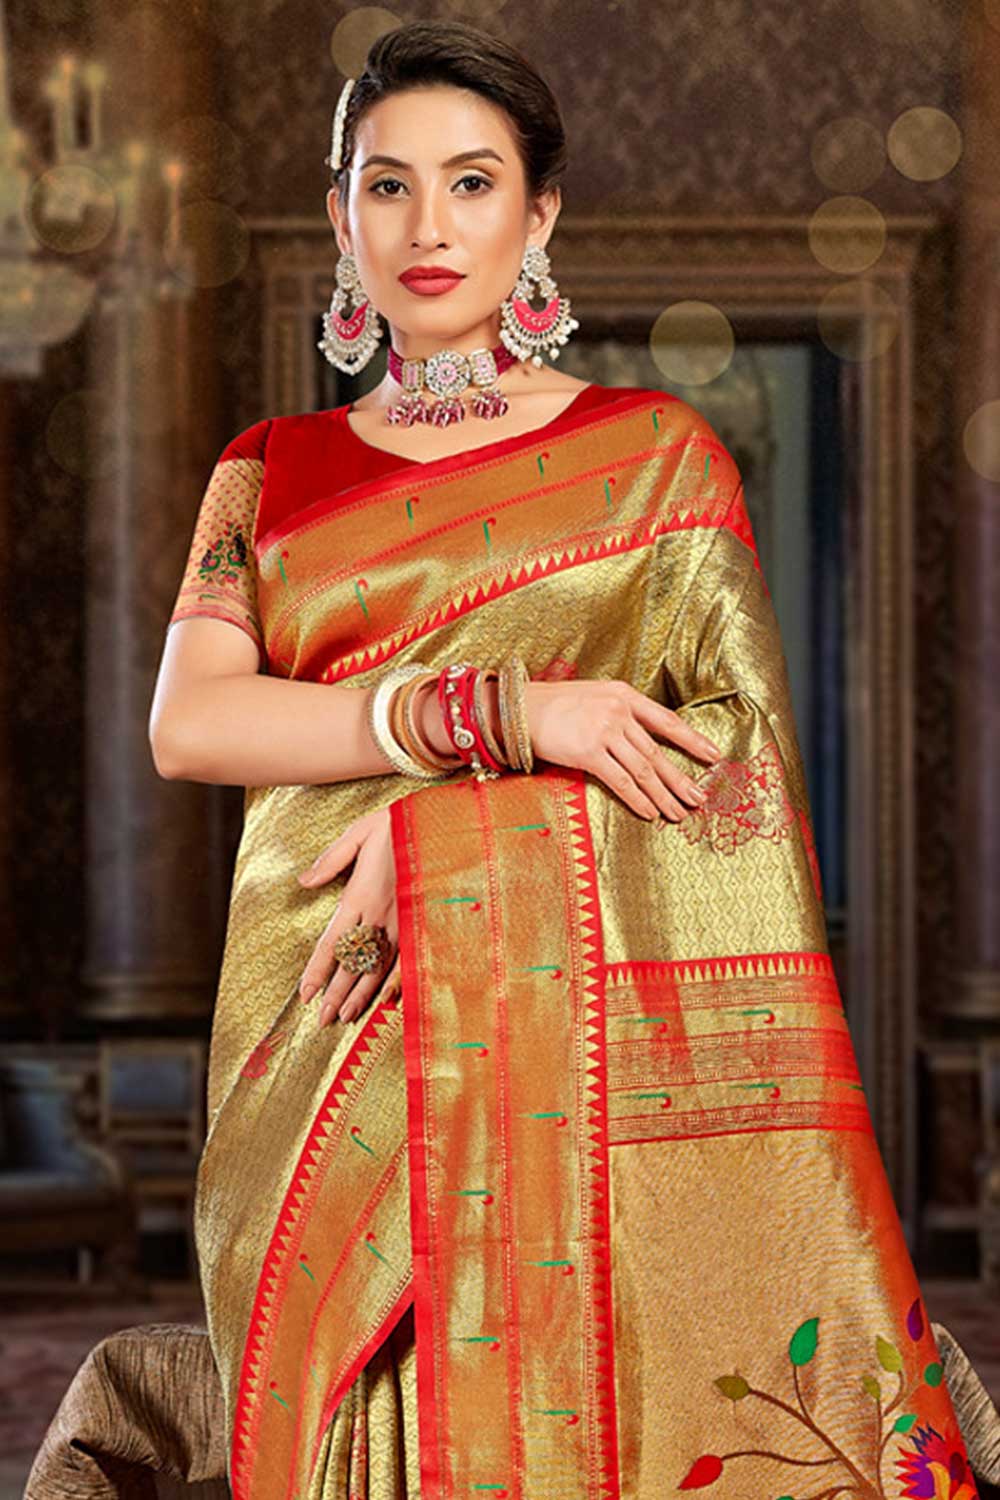 Shop Shabana Gold Paithani Art Silk One Minute Saree at best offer at our  Store - One Minute Saree